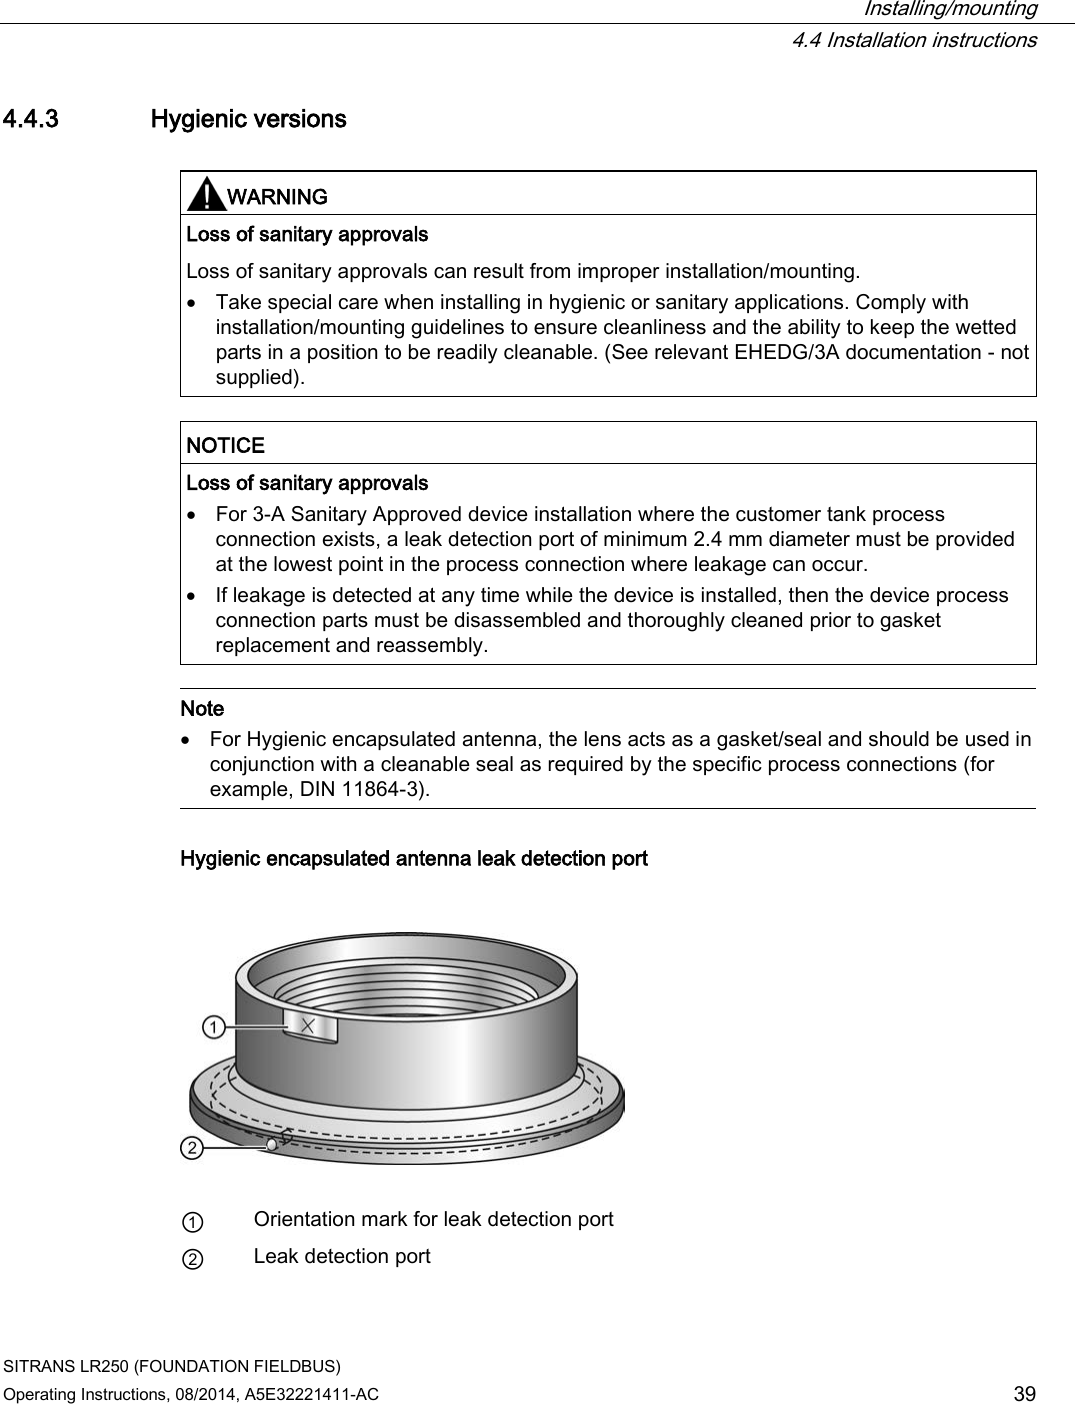  Installing/mounting  4.4 Installation instructions SITRANS LR250 (FOUNDATION FIELDBUS) Operating Instructions, 08/2014, A5E32221411-AC 39 4.4.3 Hygienic versions   WARNING Loss of sanitary approvals Loss of sanitary approvals can result from improper installation/mounting. • Take special care when installing in hygienic or sanitary applications. Comply with installation/mounting guidelines to ensure cleanliness and the ability to keep the wetted parts in a position to be readily cleanable. (See relevant EHEDG/3A documentation - not supplied).   NOTICE Loss of sanitary approvals • For 3-A Sanitary Approved device installation where the customer tank process connection exists, a leak detection port of minimum 2.4 mm diameter must be provided at the lowest point in the process connection where leakage can occur. • If leakage is detected at any time while the device is installed, then the device process connection parts must be disassembled and thoroughly cleaned prior to gasket replacement and reassembly.   Note • For Hygienic encapsulated antenna, the lens acts as a gasket/seal and should be used in conjunction with a cleanable seal as required by the specific process connections (for example, DIN 11864-3).  Hygienic encapsulated antenna leak detection port    ① Orientation mark for leak detection port ② Leak detection port  